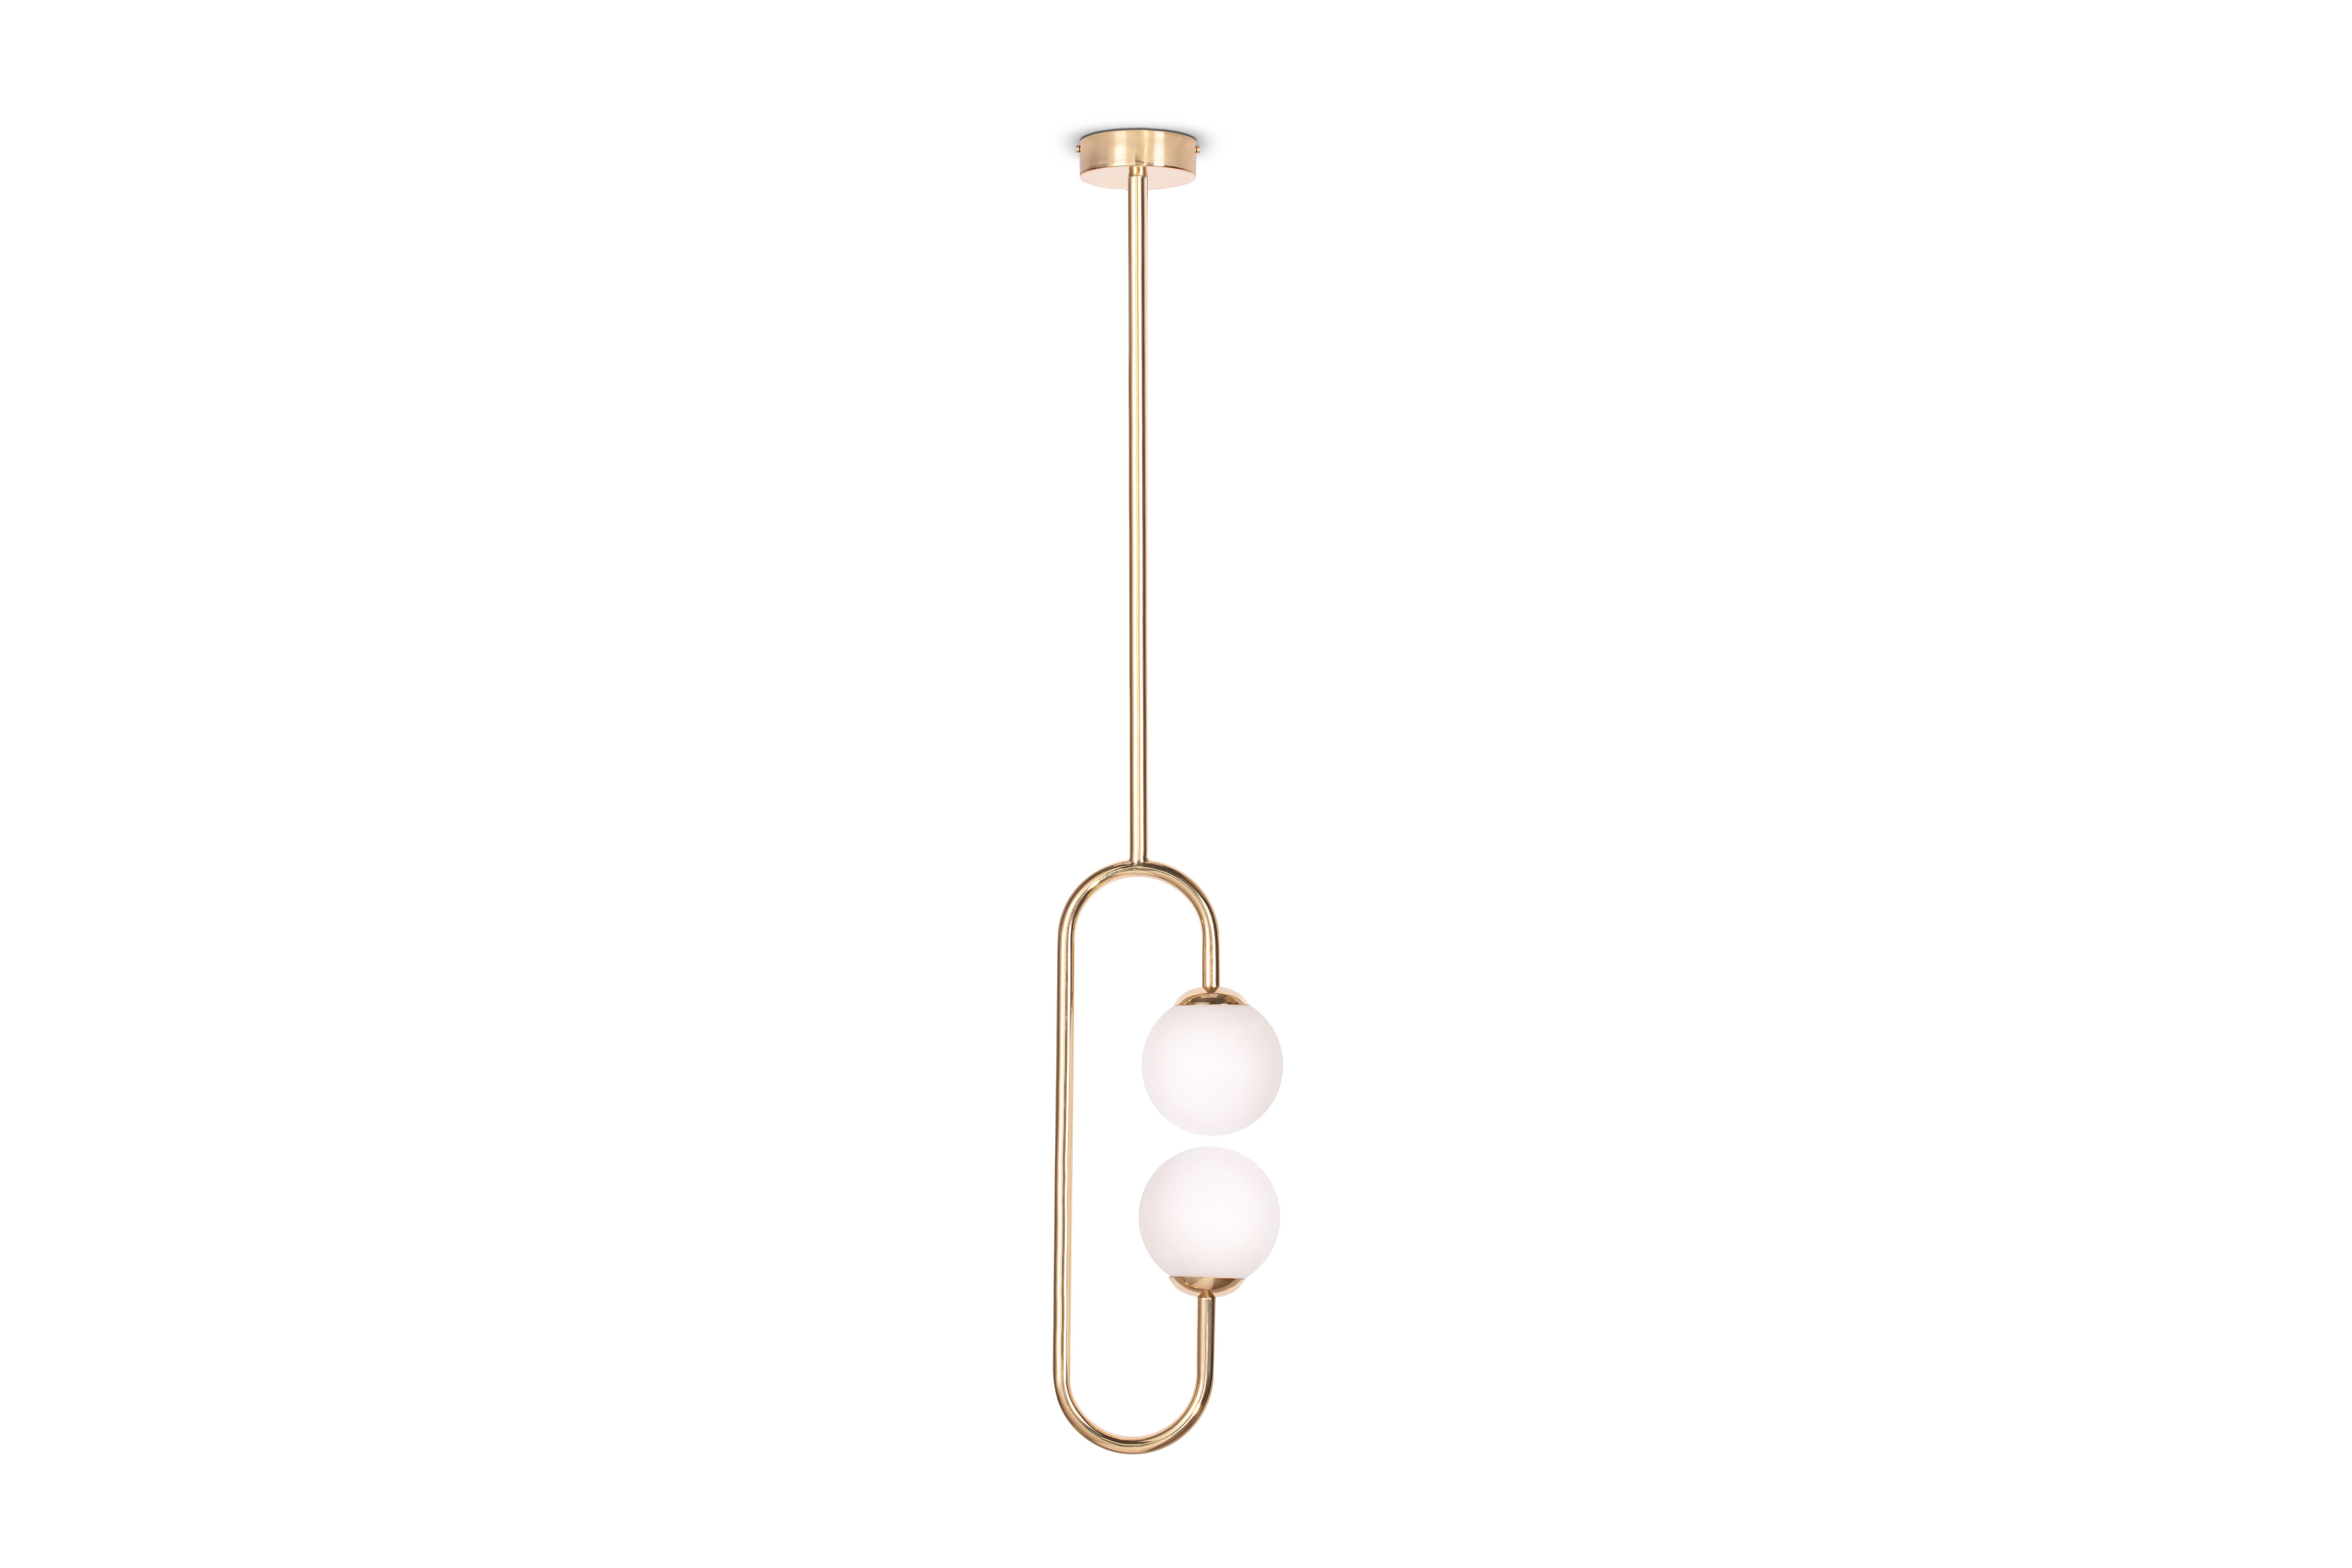 Olivia brass ceiling lamp, Royal Stranger
Dimensions: W 20 x D 14 x H 114 cm
Materials: Body polished brass. Glass balls Blown glass opal diffuser.


Inspired by the femininity and using bold and vibrant color schemes, this collection is meant